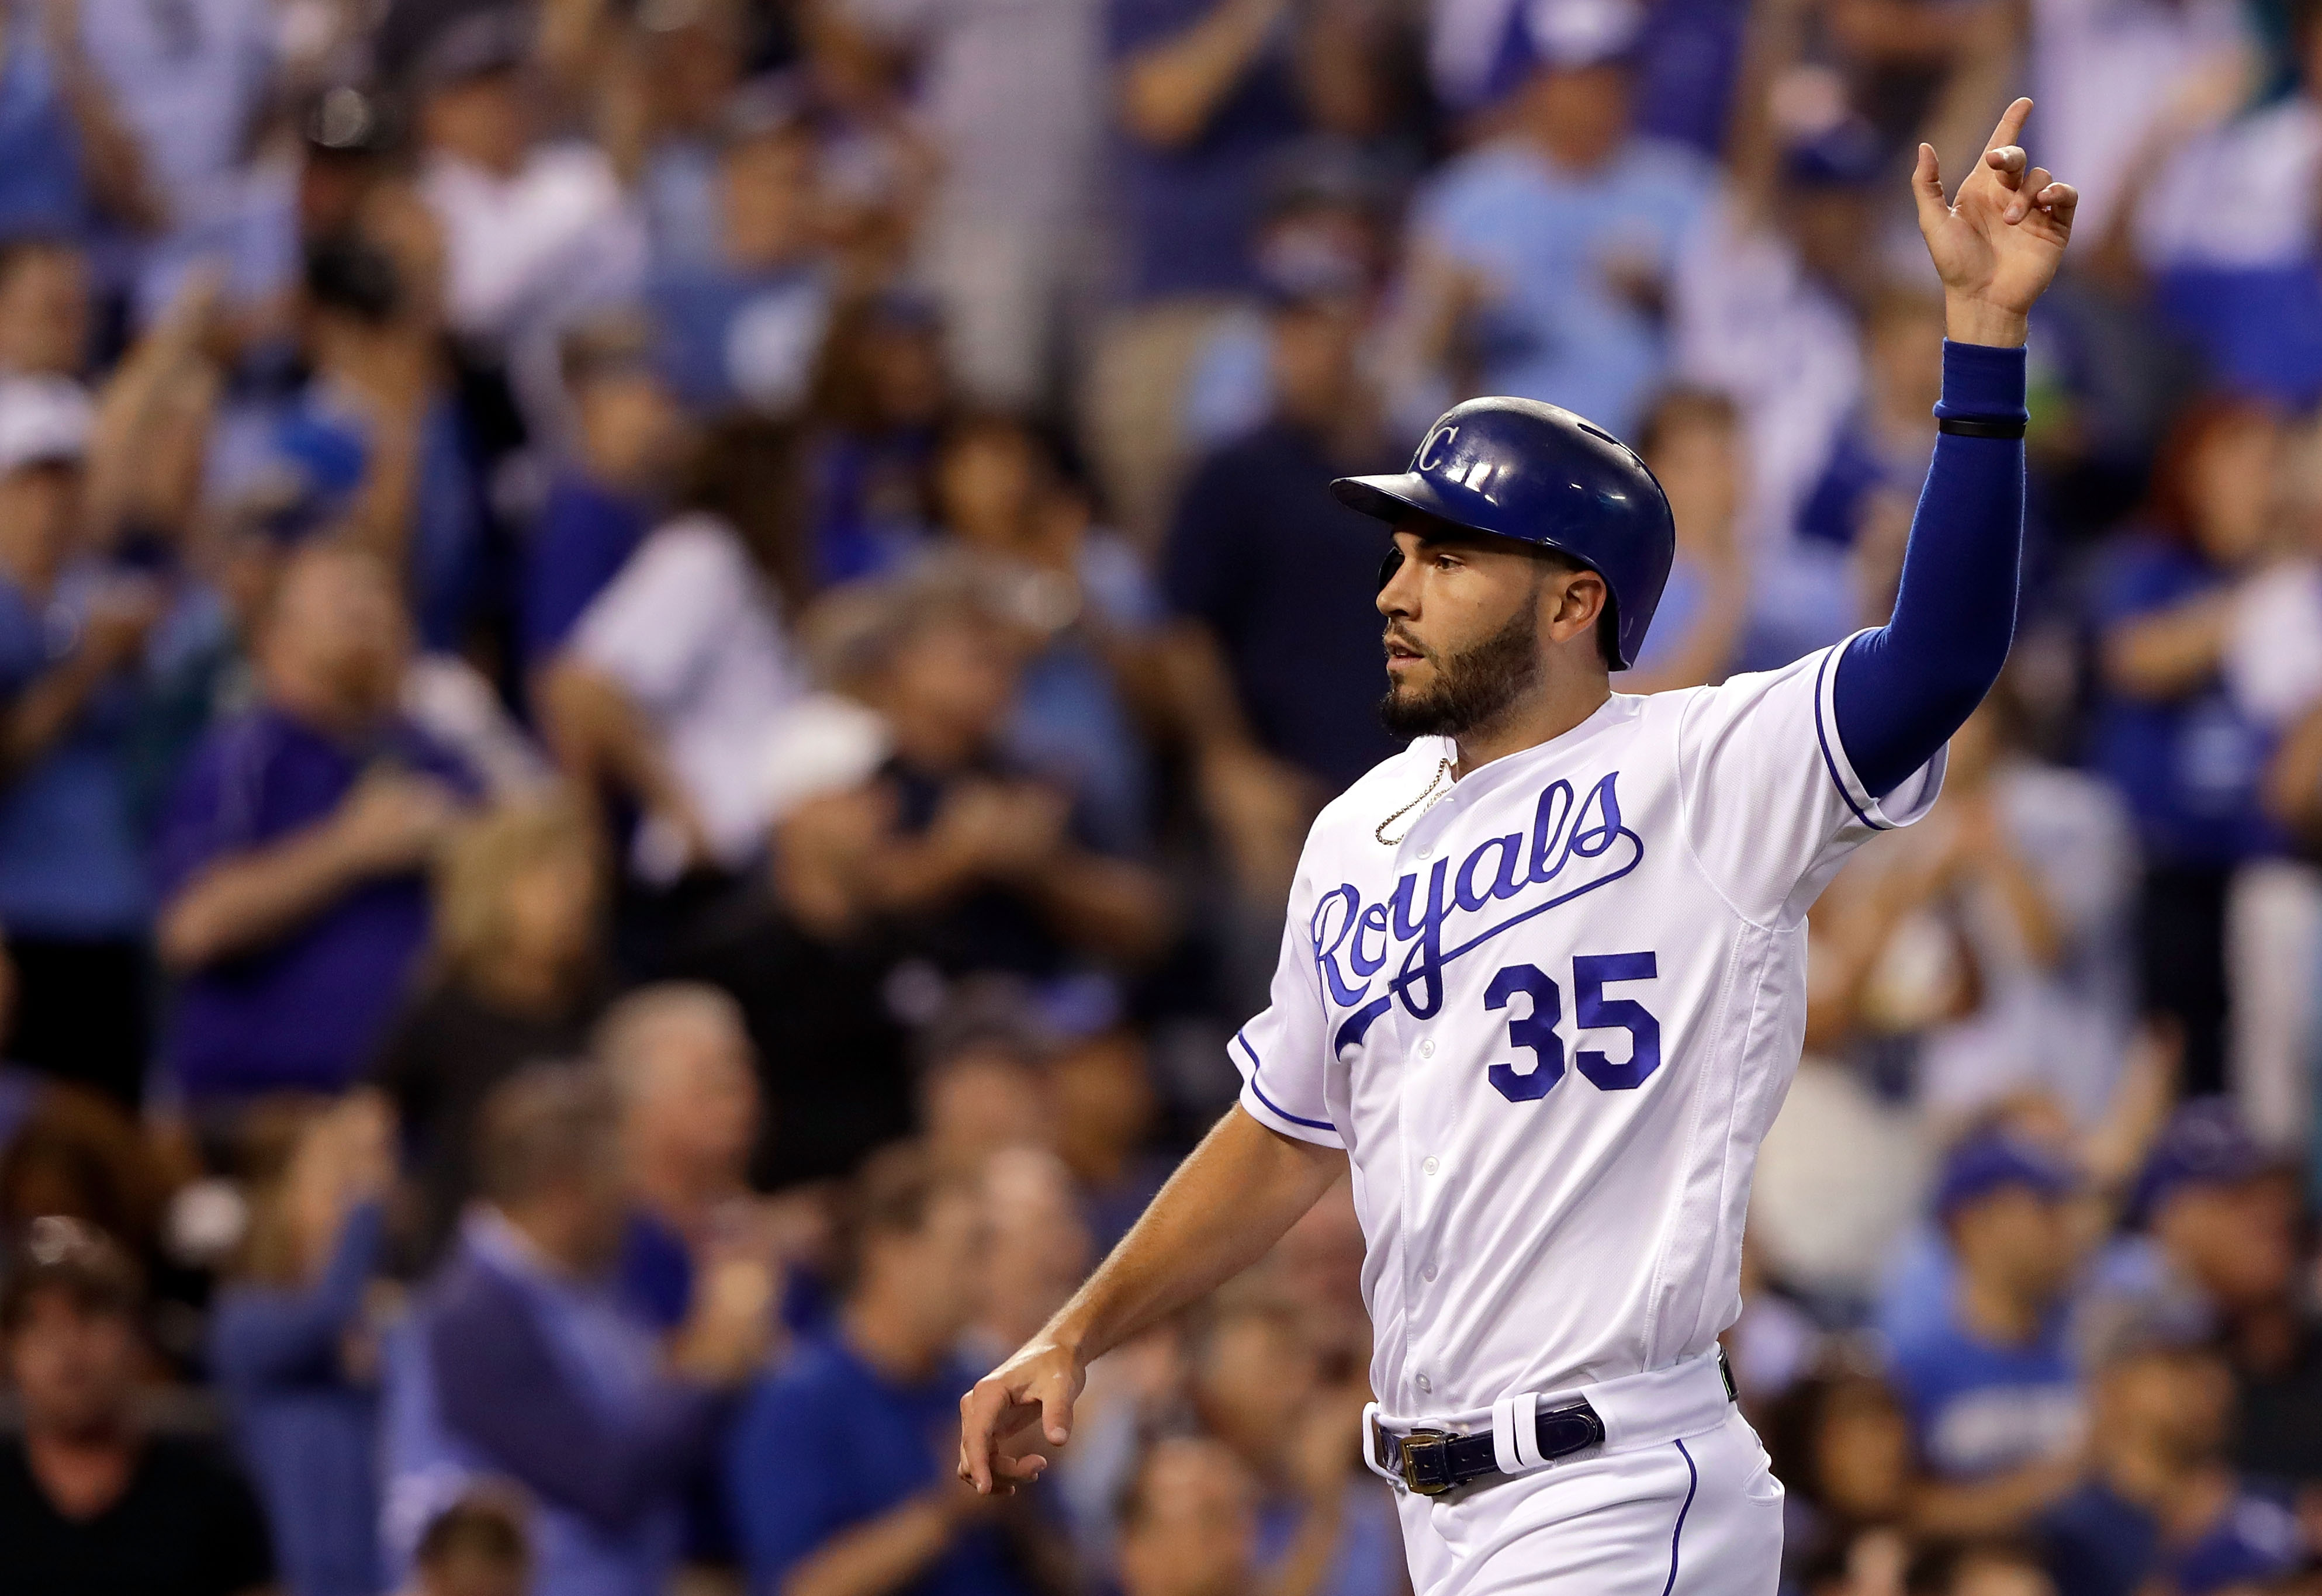 Eric Hosmer's Fenway stats make Red Sox trade look even better